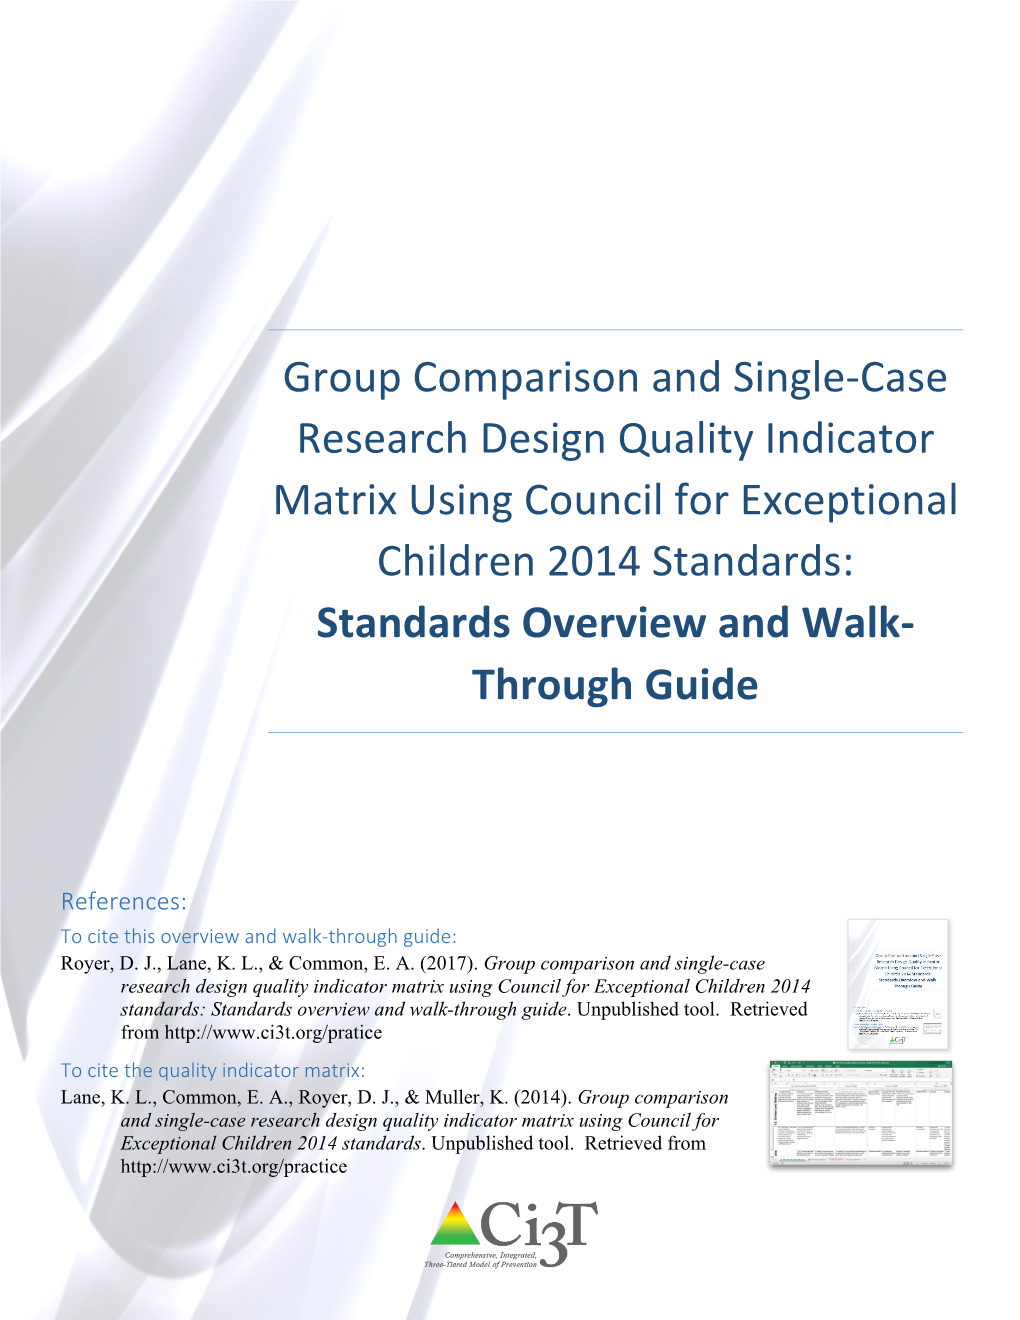 Group Comparison and Single-Case Research Design Quality Indicator